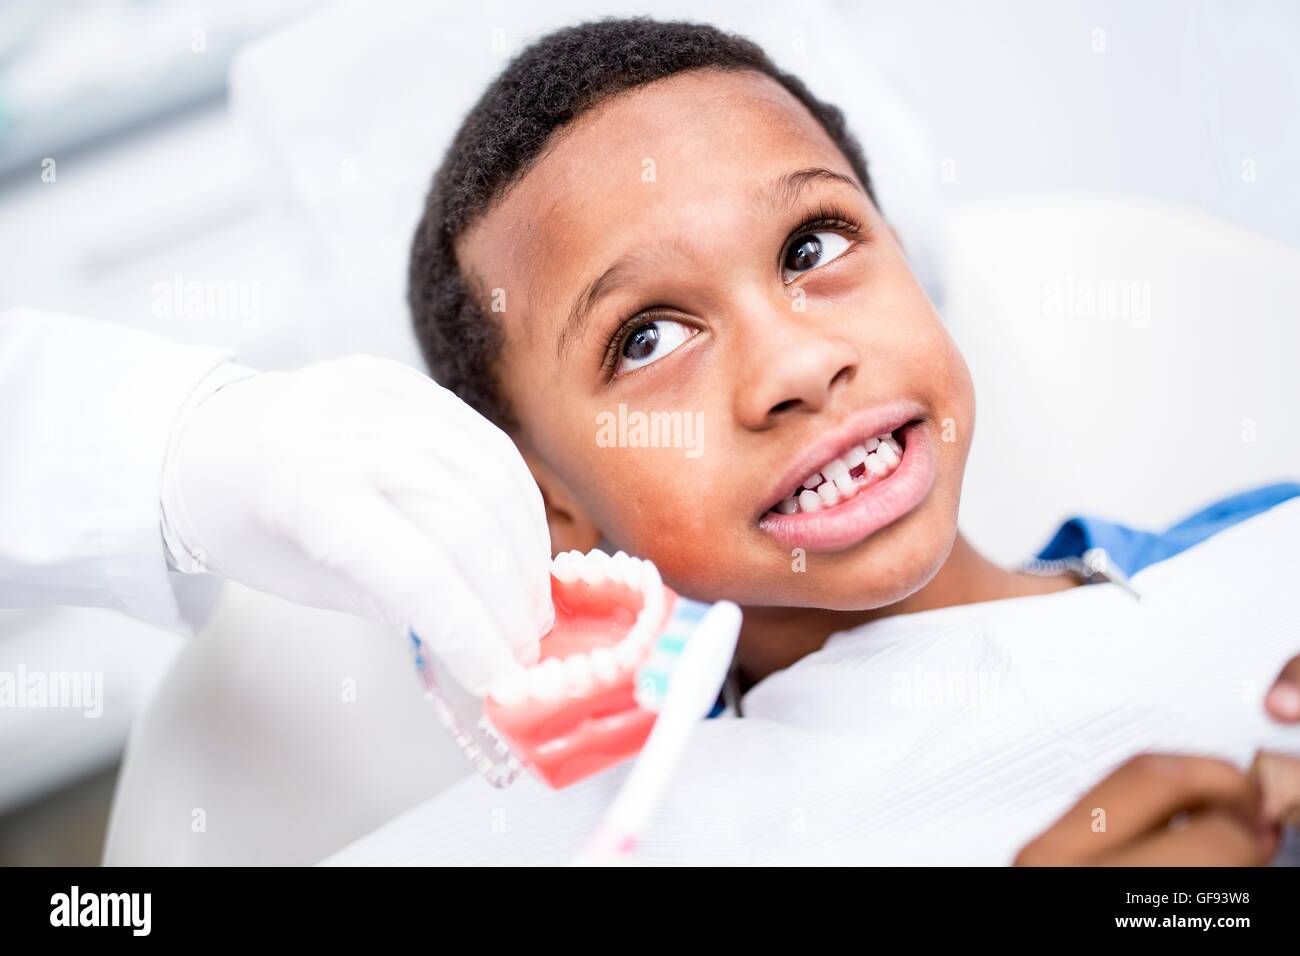 MODEL RELEASED. Dentist showing boy how to brush his teeth. Stock Photo